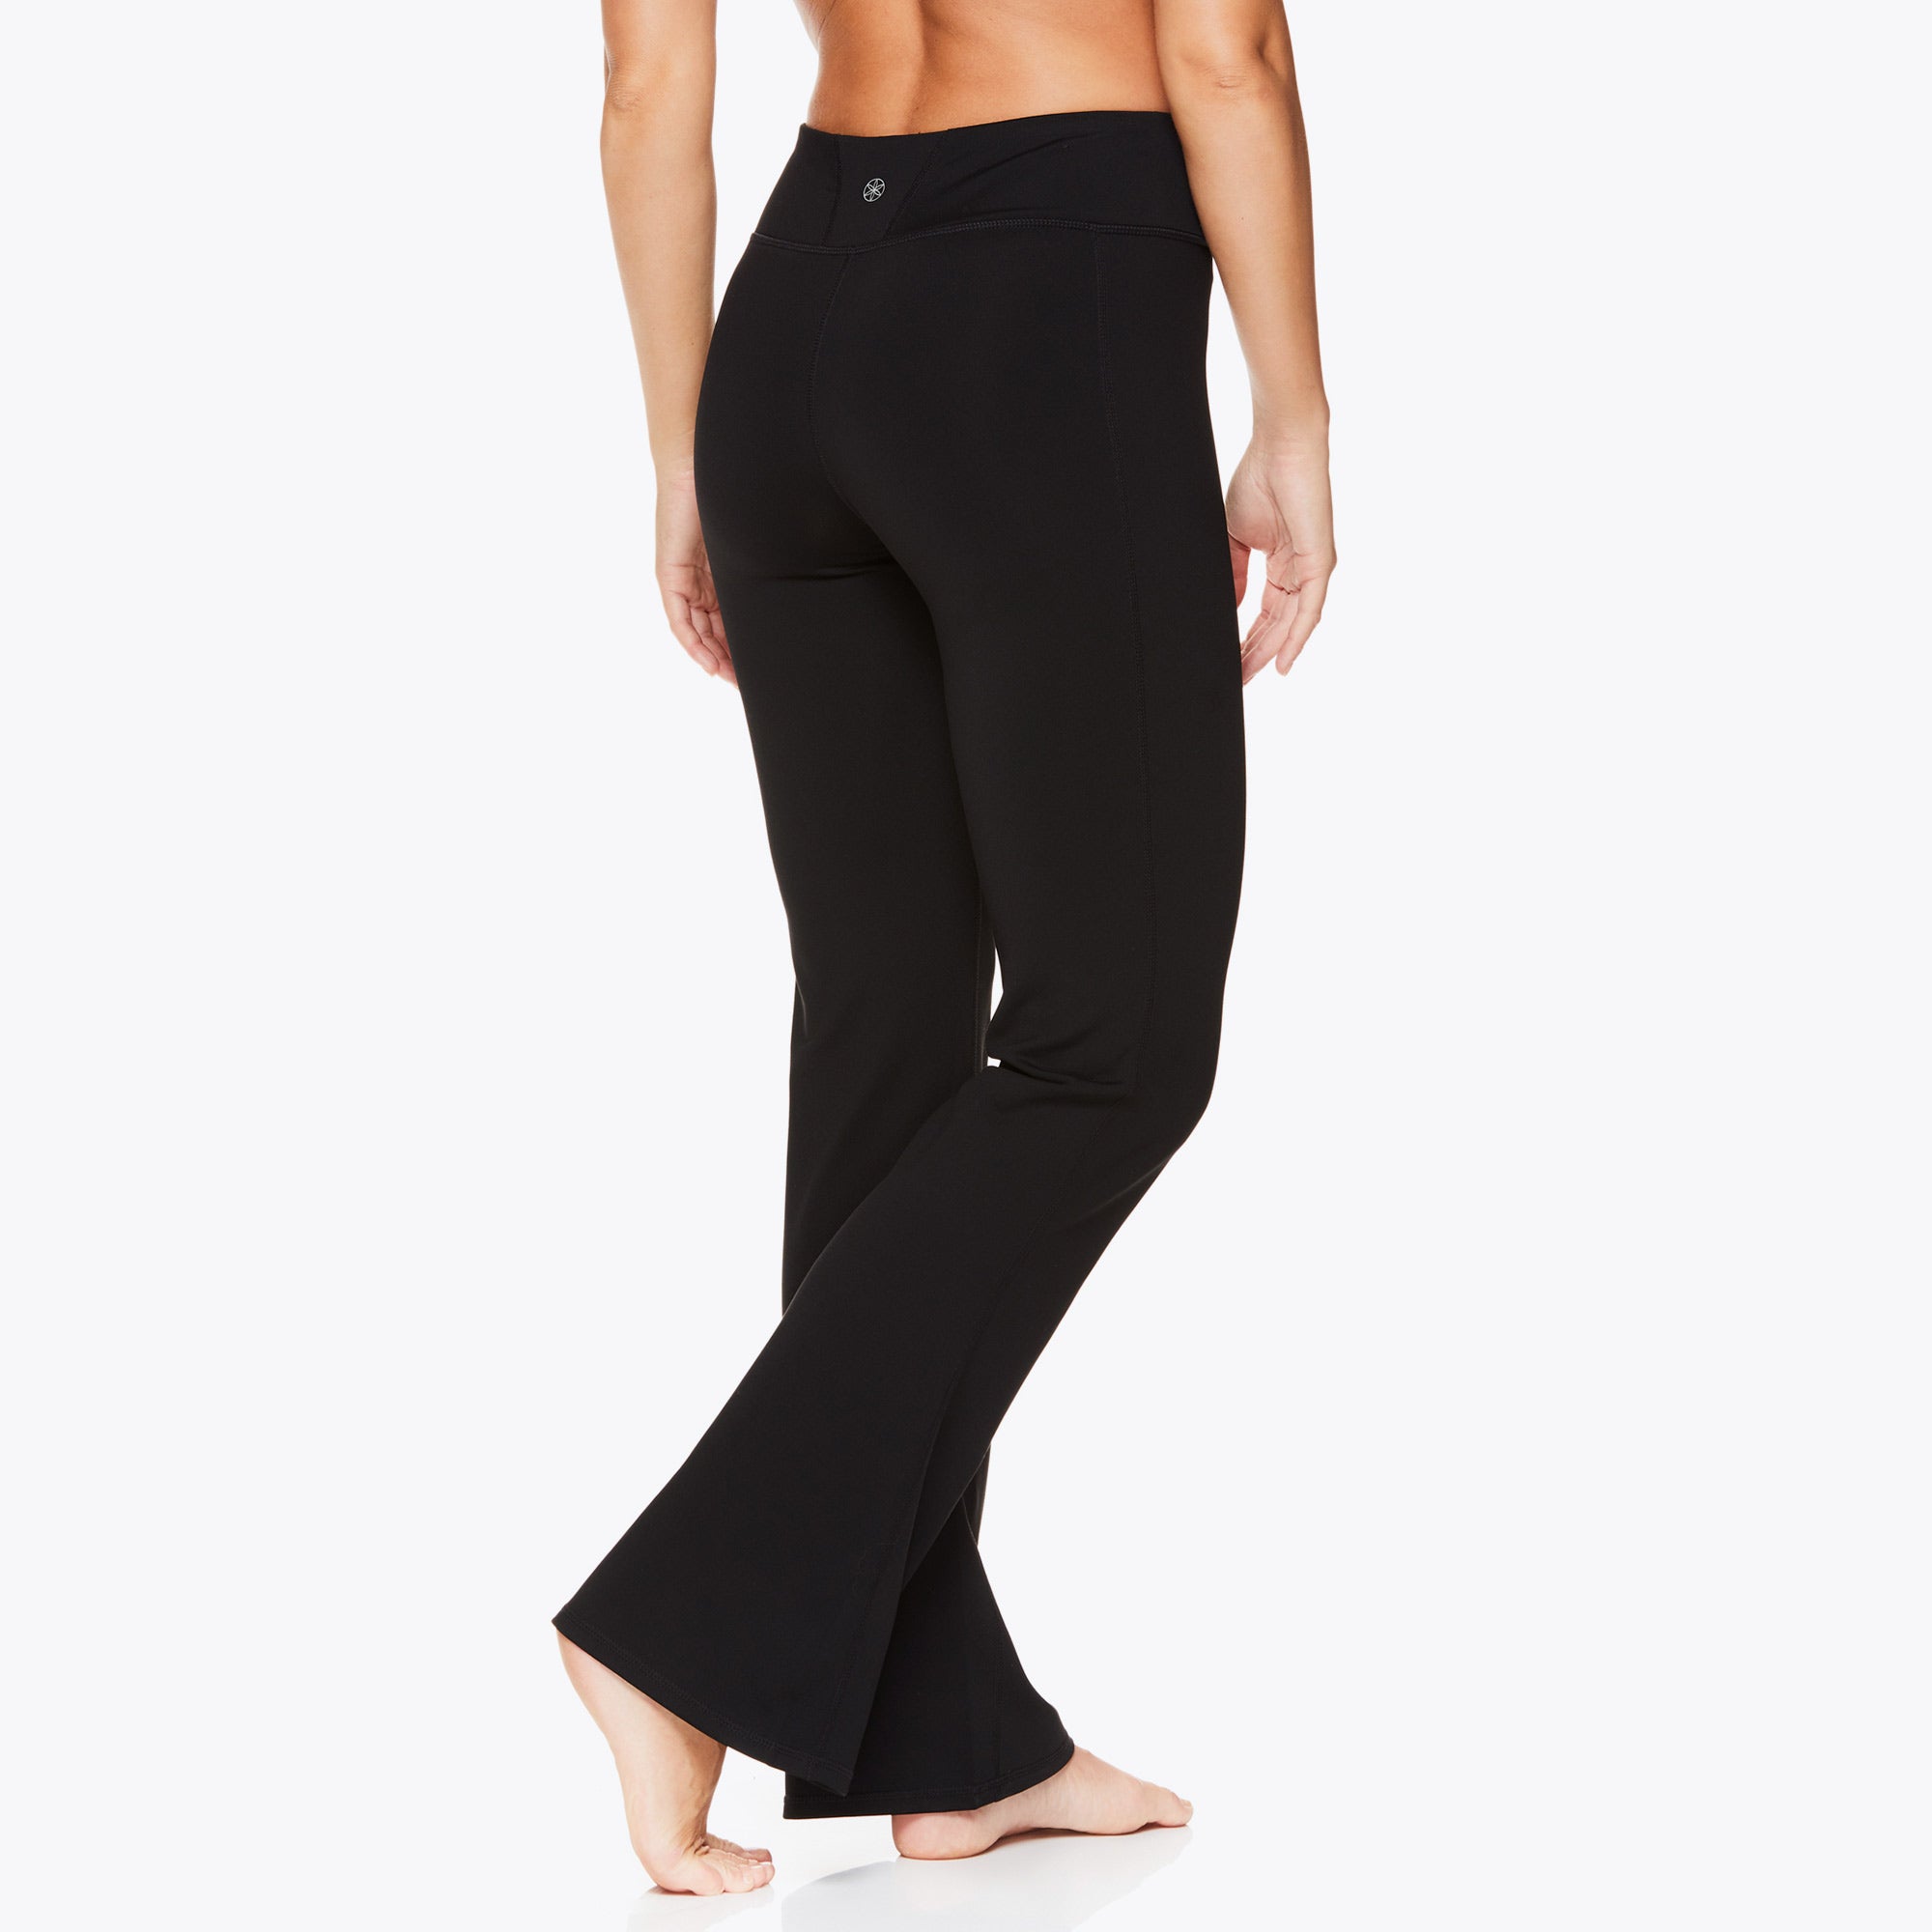 bootcut yoga pants with side pockets